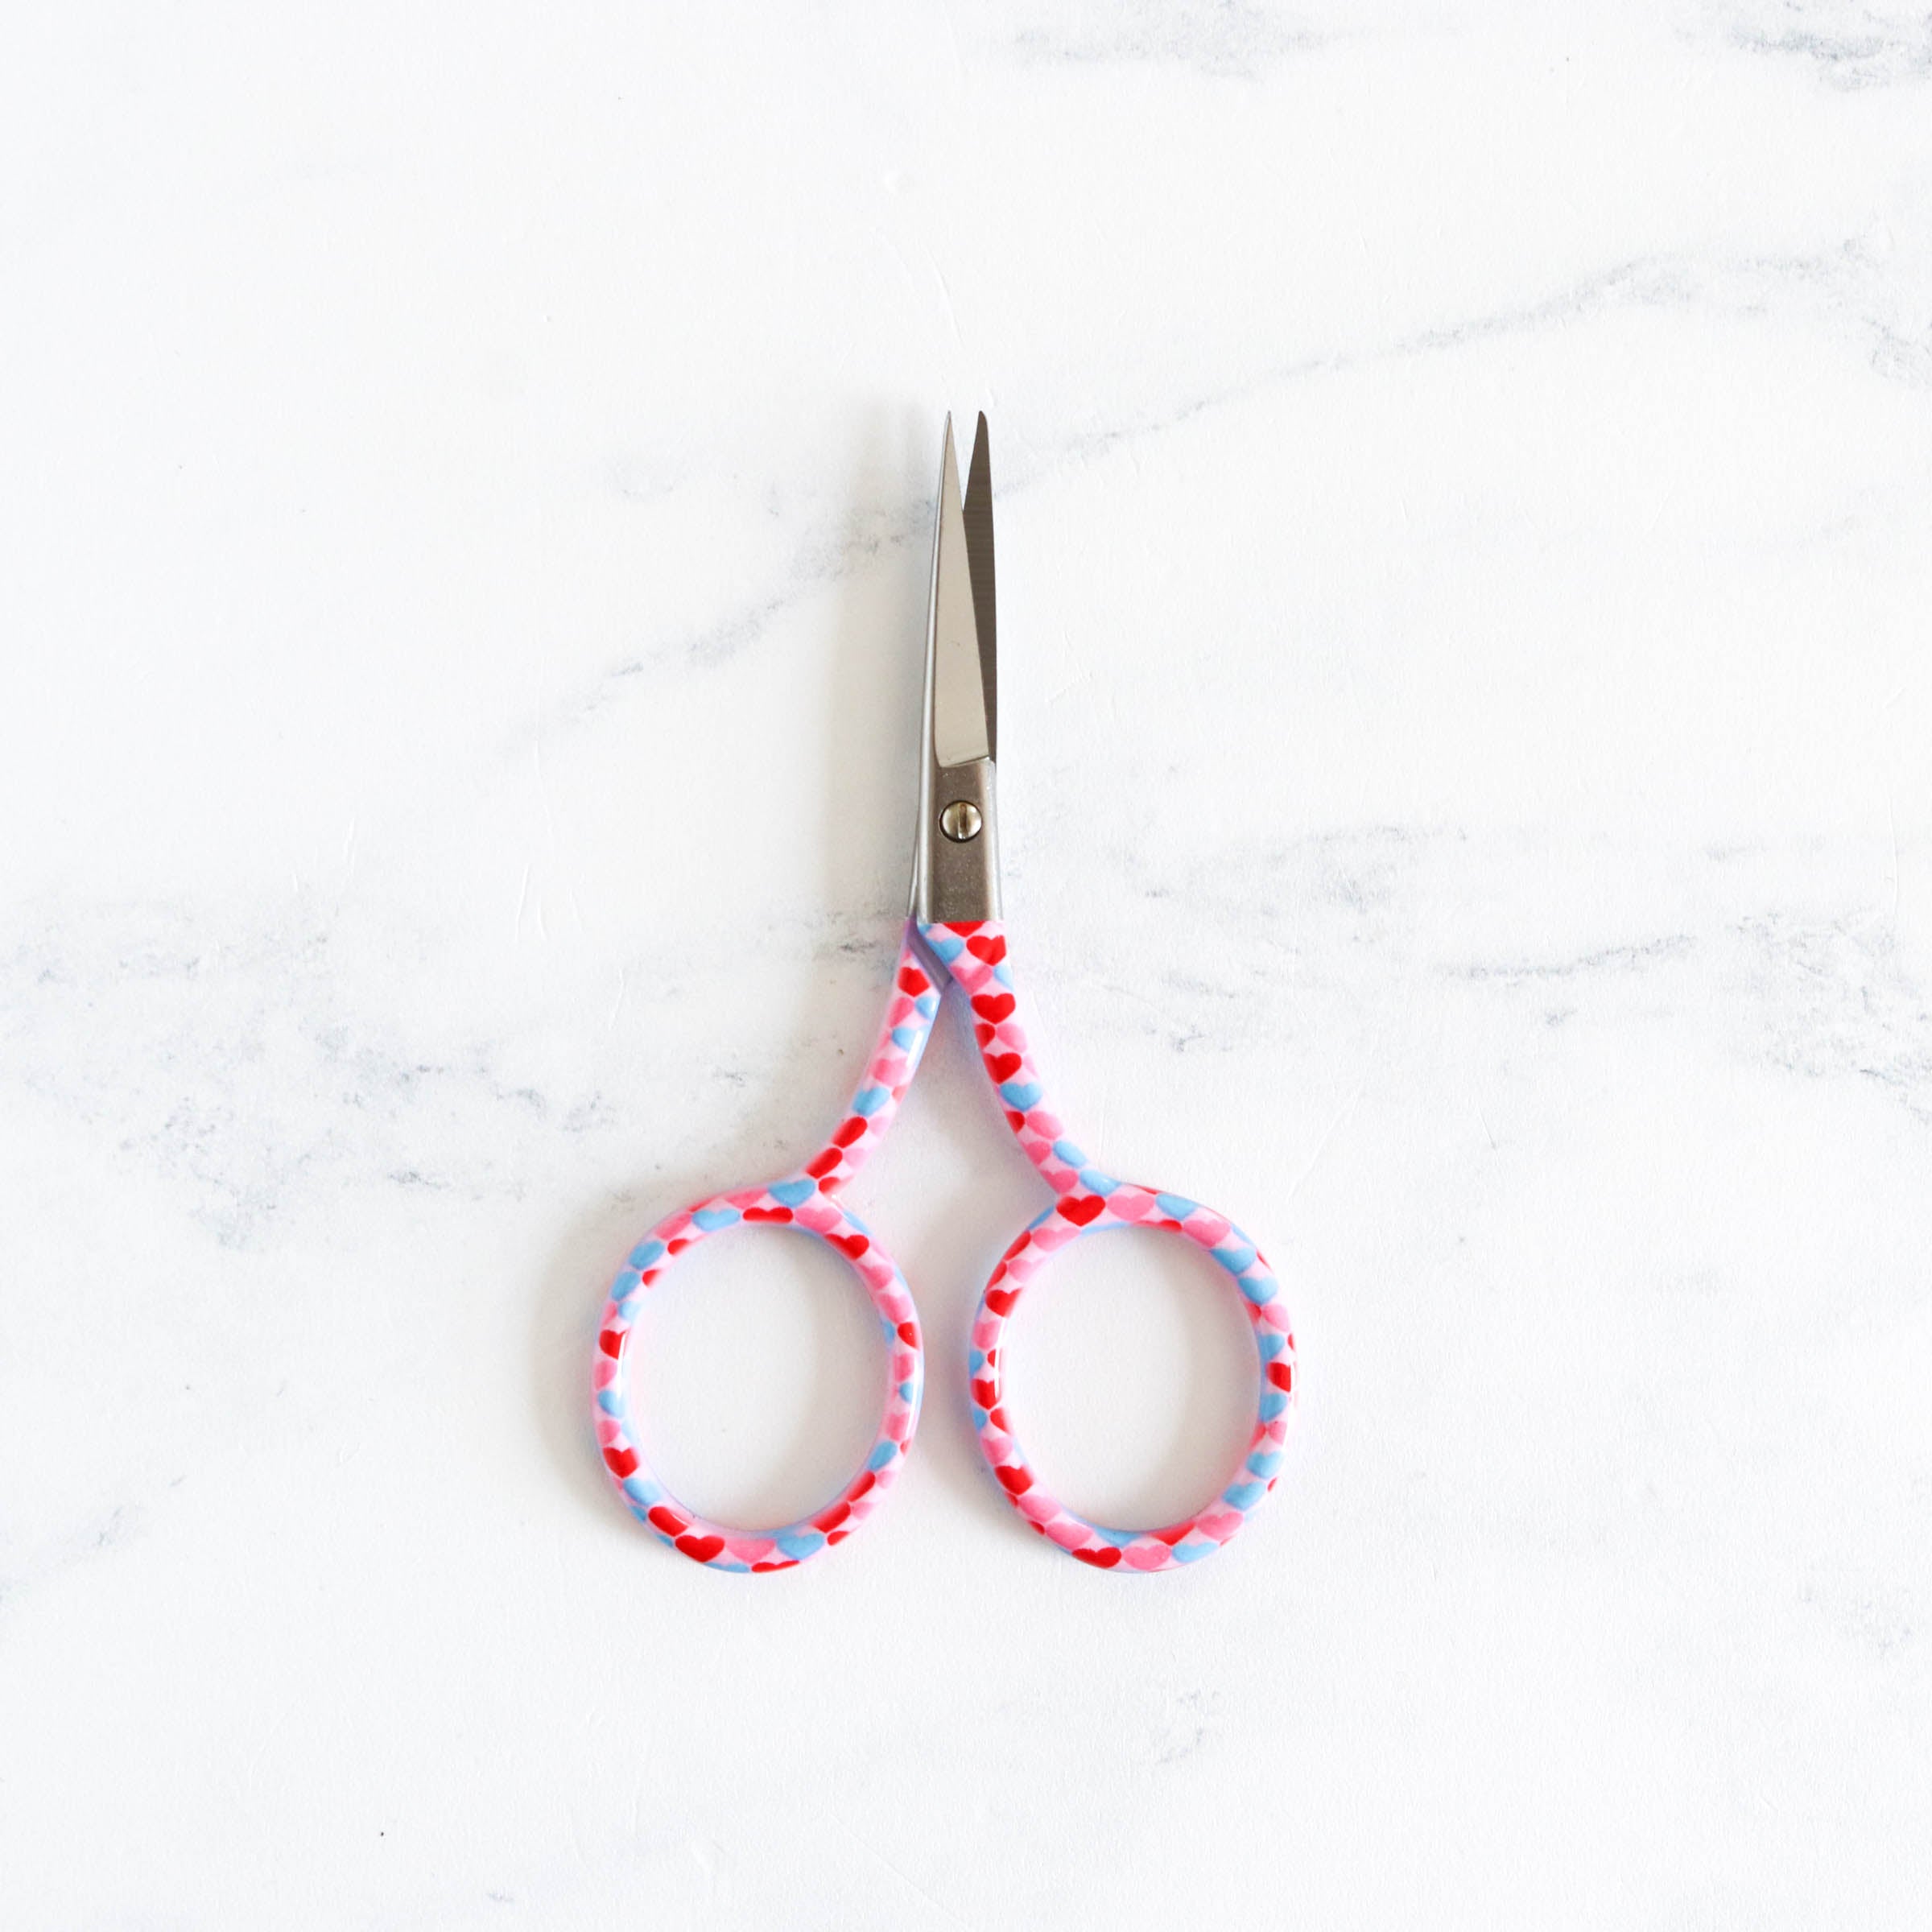 Colorful Stork Embroidery Scissors - Stitched Modern